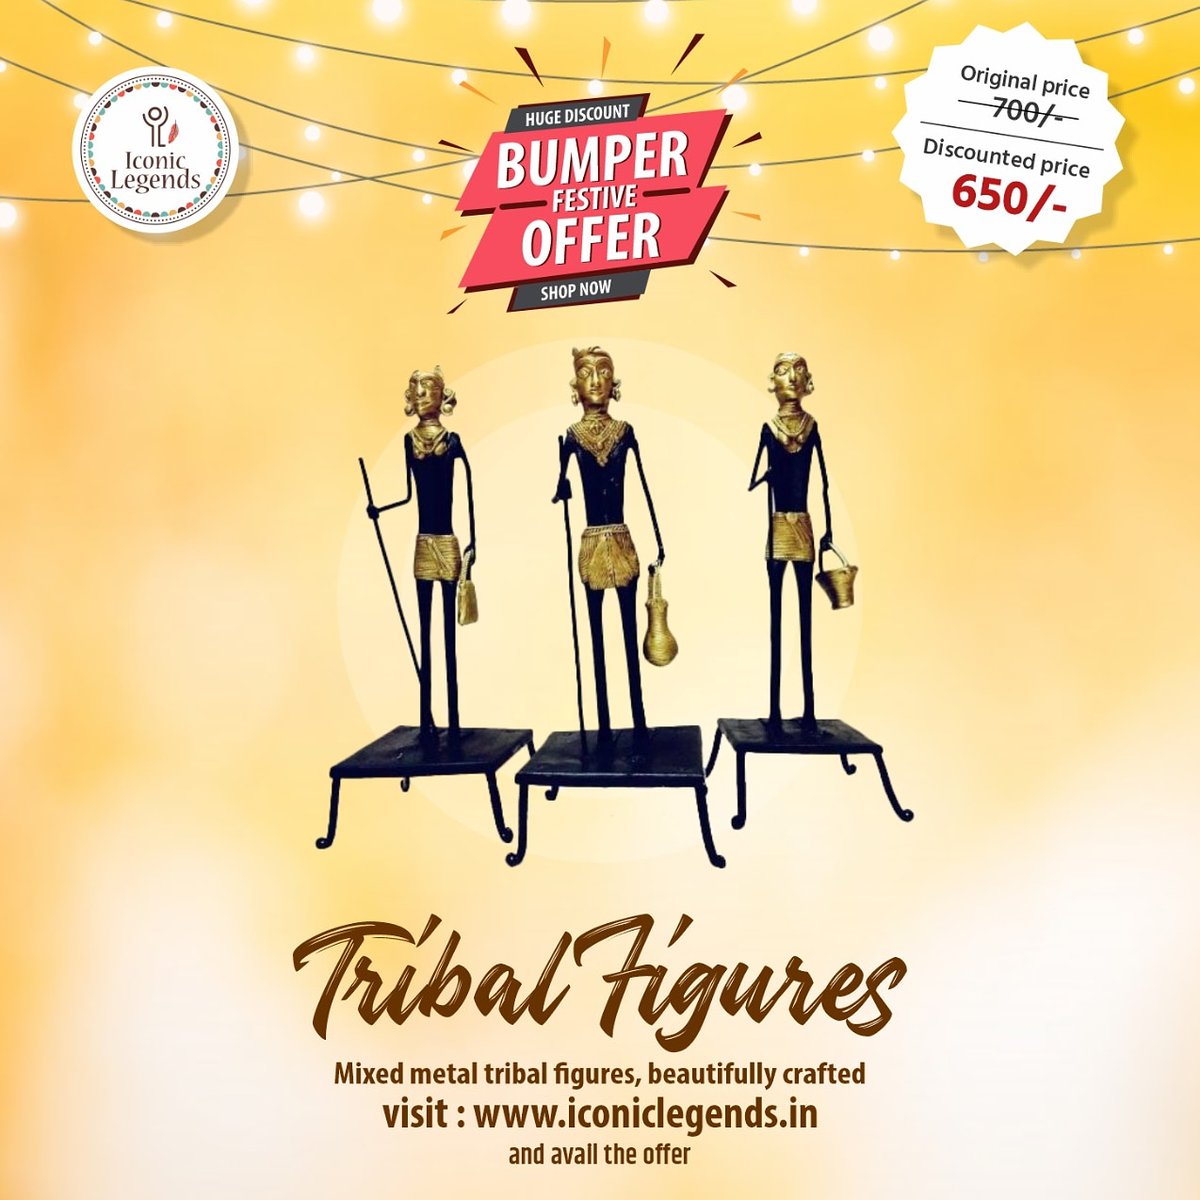 ⚜️Decorate your home, office with this beautifully crafted tribal figures.
⚜️Buy at a discounted price Rs.650/- only.
⚜️Material: Mixed Metal
⚜️Visit iconiclegends.in to avail the offer.
#tribalart #art #tribal  #arttribal  #artwork #artist  #handmade #artpremier